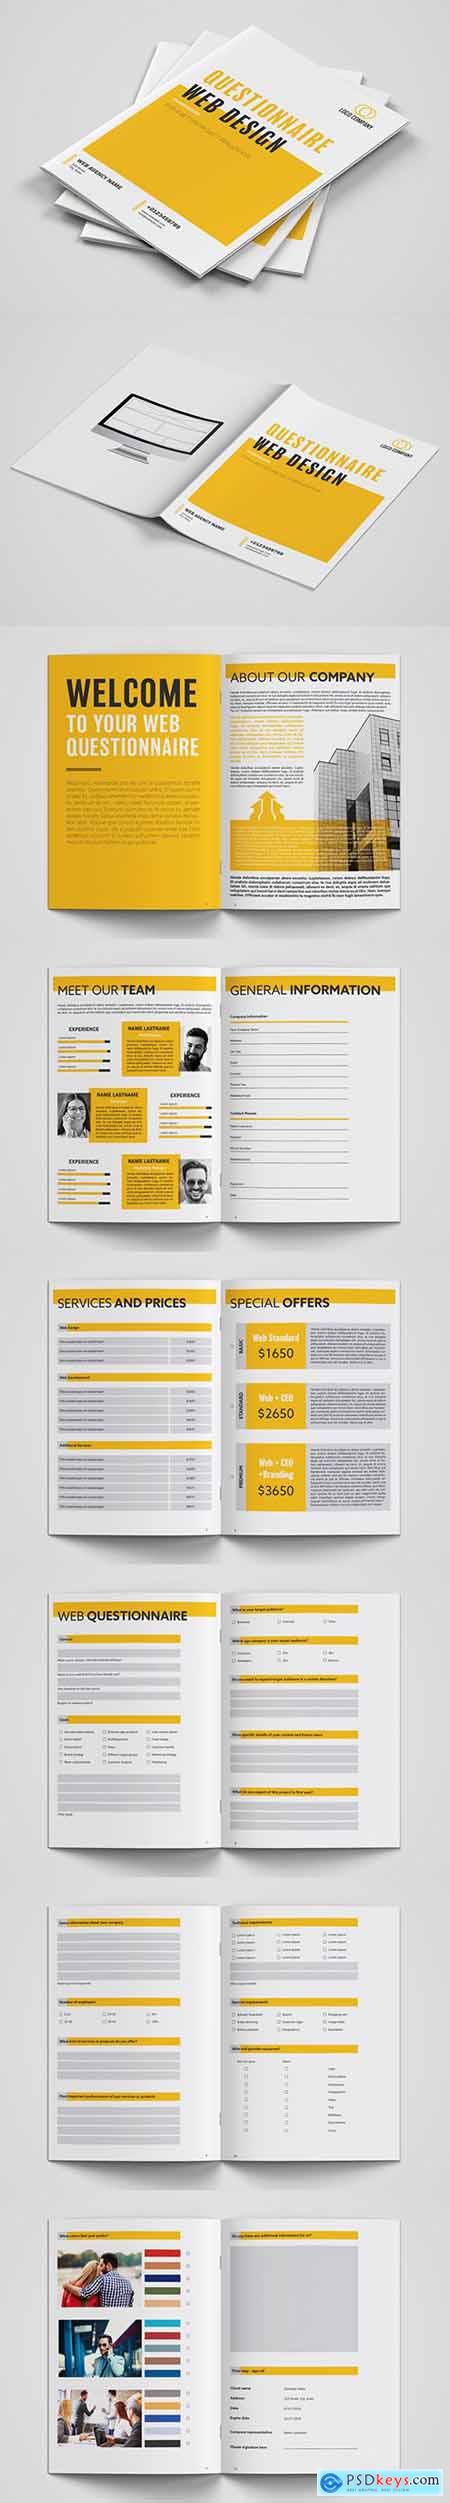 Questionnaire Layout with Yellow Accents 207333339